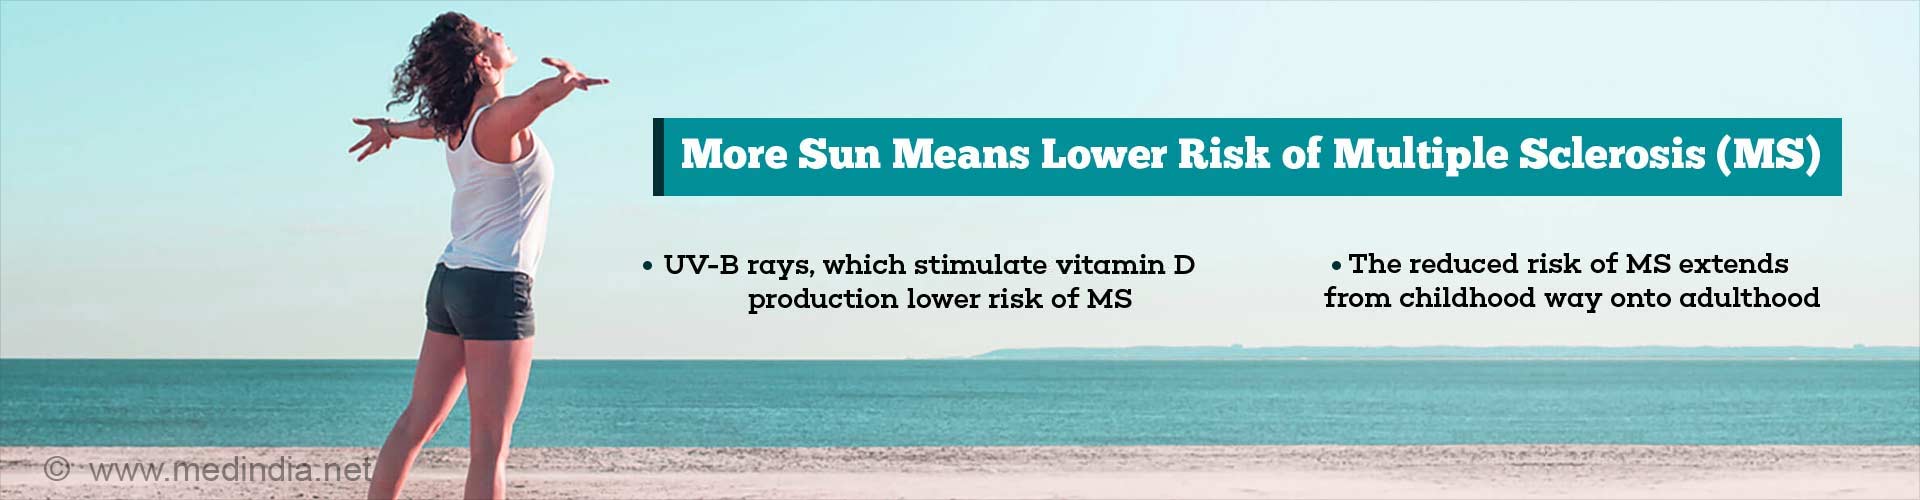 more sun means lower risk of multiple sclerosis (ms)
- UV-B rays, which stimulate vitamin D production lower risk of MS
- the reduced risk of MS extends from childhood way onto adulthood